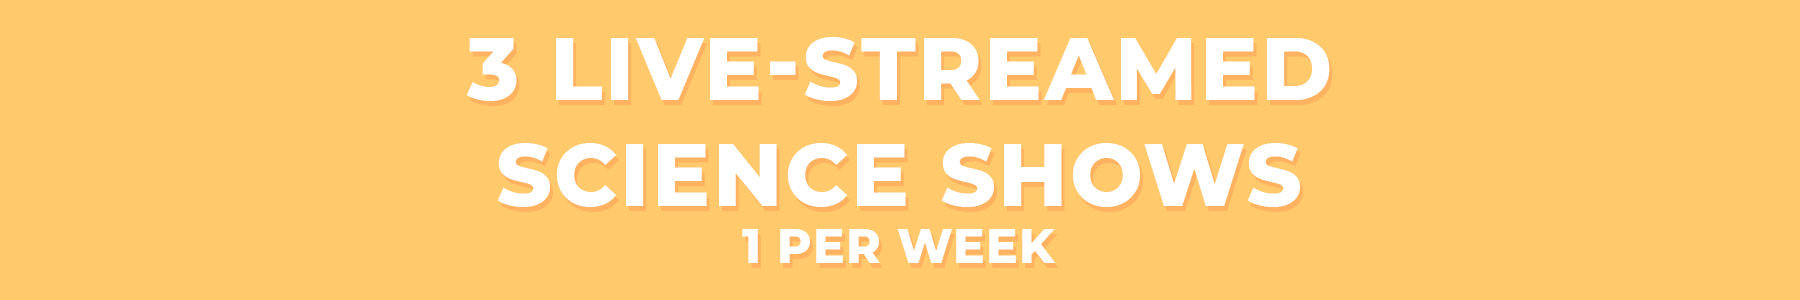 3 live-streamed science shows 1 per week